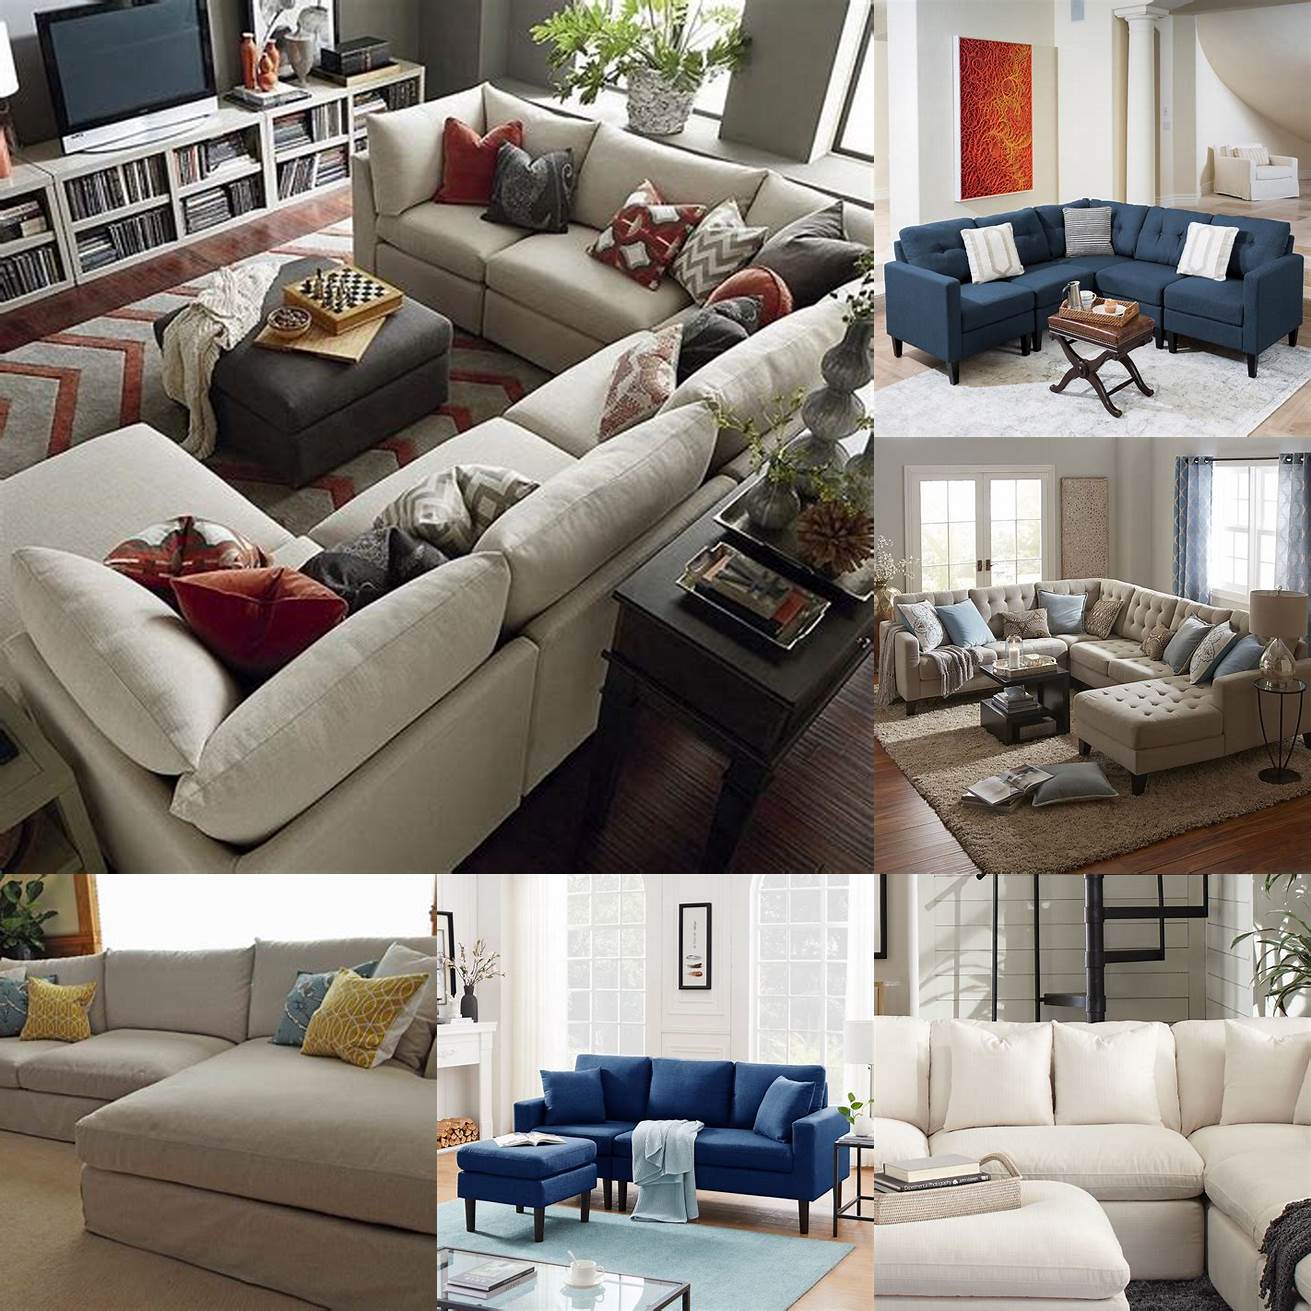 Use a Sectional Sofa